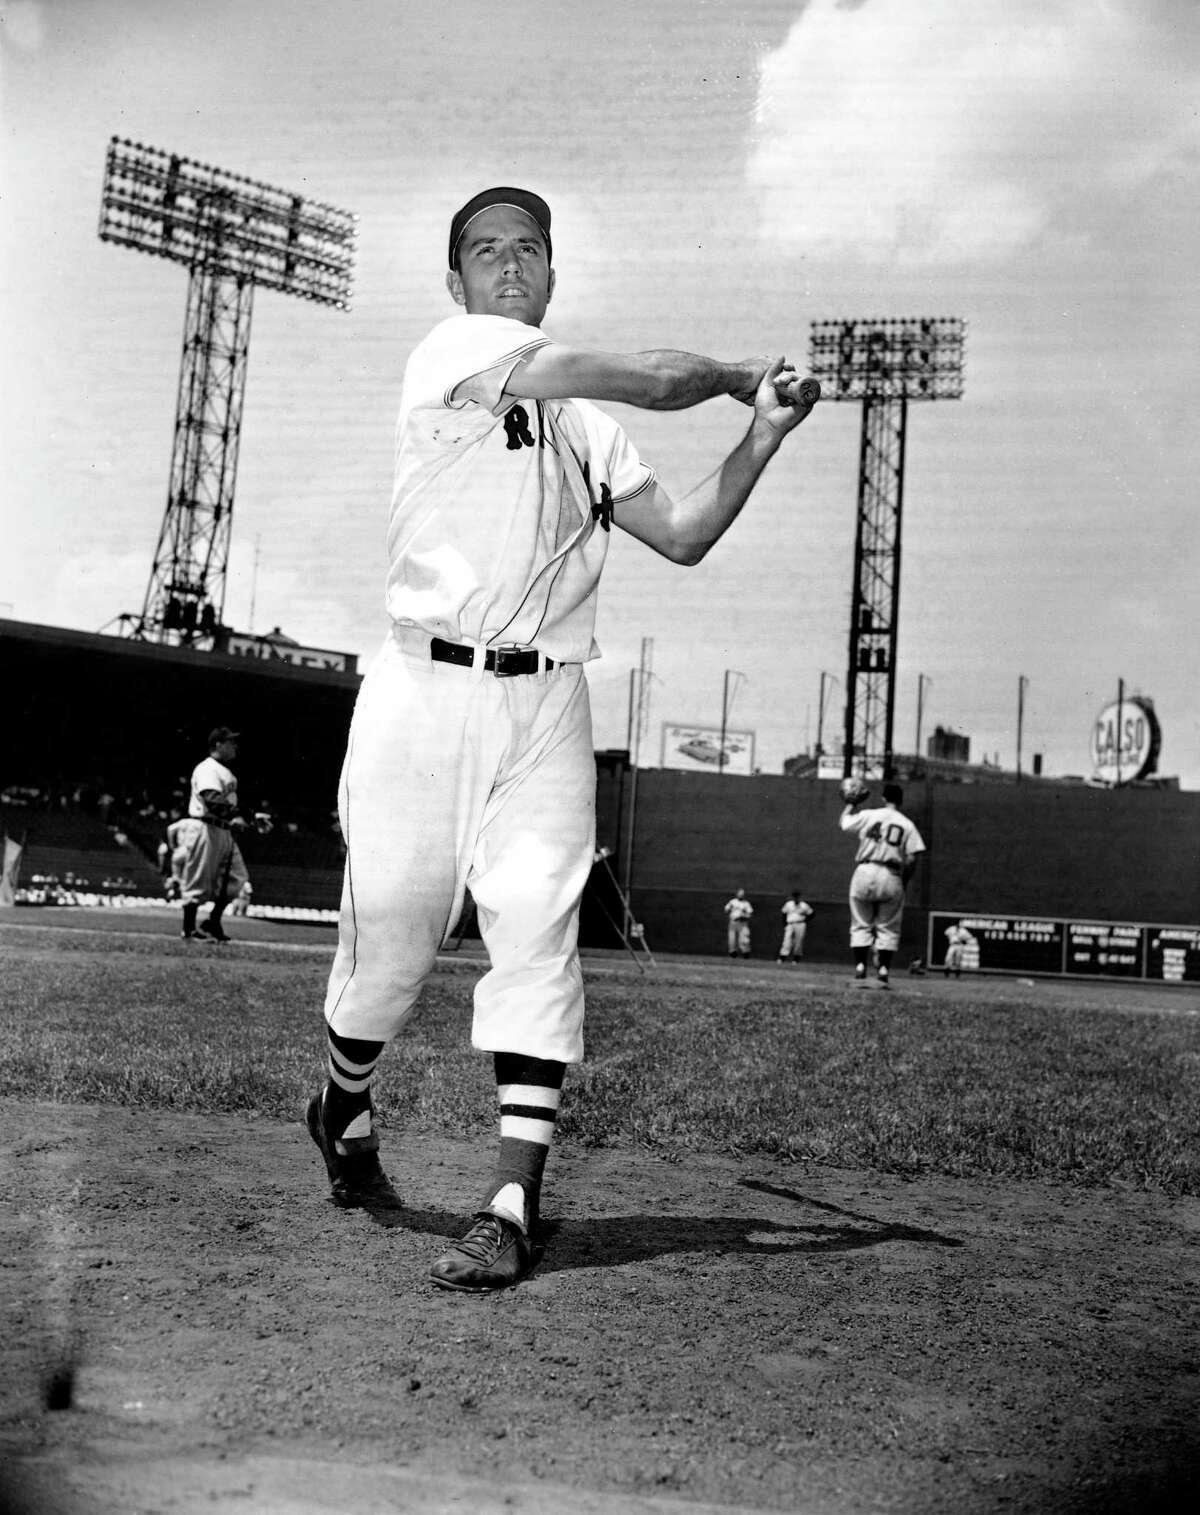 In this file photo, Jim Piersall of the Boston Red Sox poses at Fenway Park in Boston, Ma., before a game against the Cleveland Indians. Piersall, who bared his soul about his struggles with mental illness in his book ‘Fear Strikes Out,’ has died. The Boston Red Sox, for whom Piersall played for seven of his 17 seasons in the majors, said Piersall died Saturday at a care facility in Wheaton, Ill., after a monthslong illness.